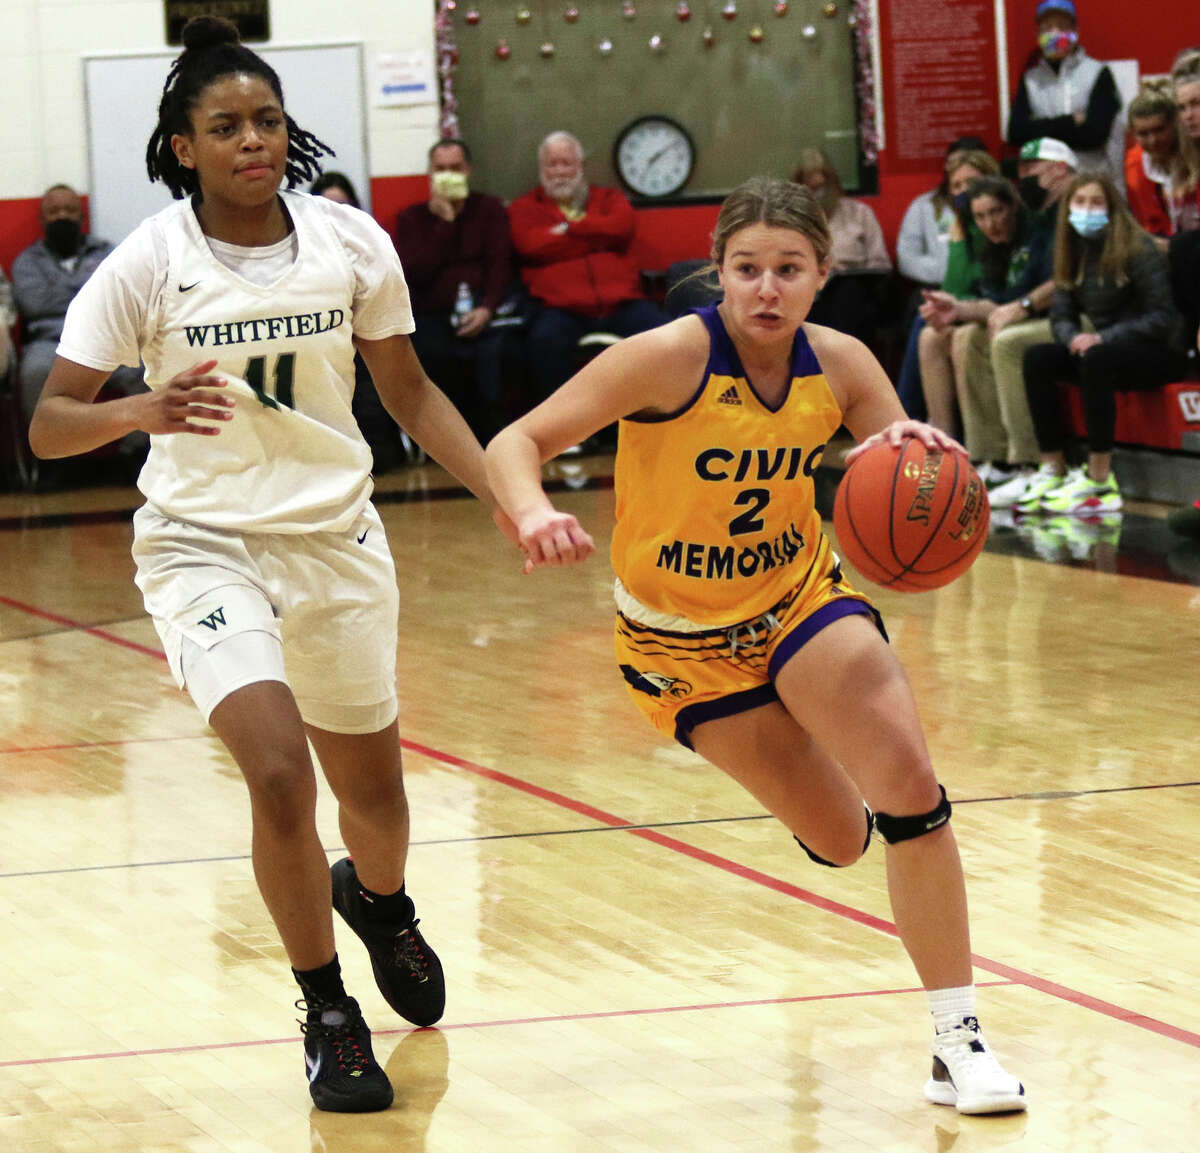 CM's Avari Combes (right) drives past Whitfield's Brooklyn Rhodes during the first half Sunday night in the quarterfinals of the Visitation Christmas Tournament in St. Louis.